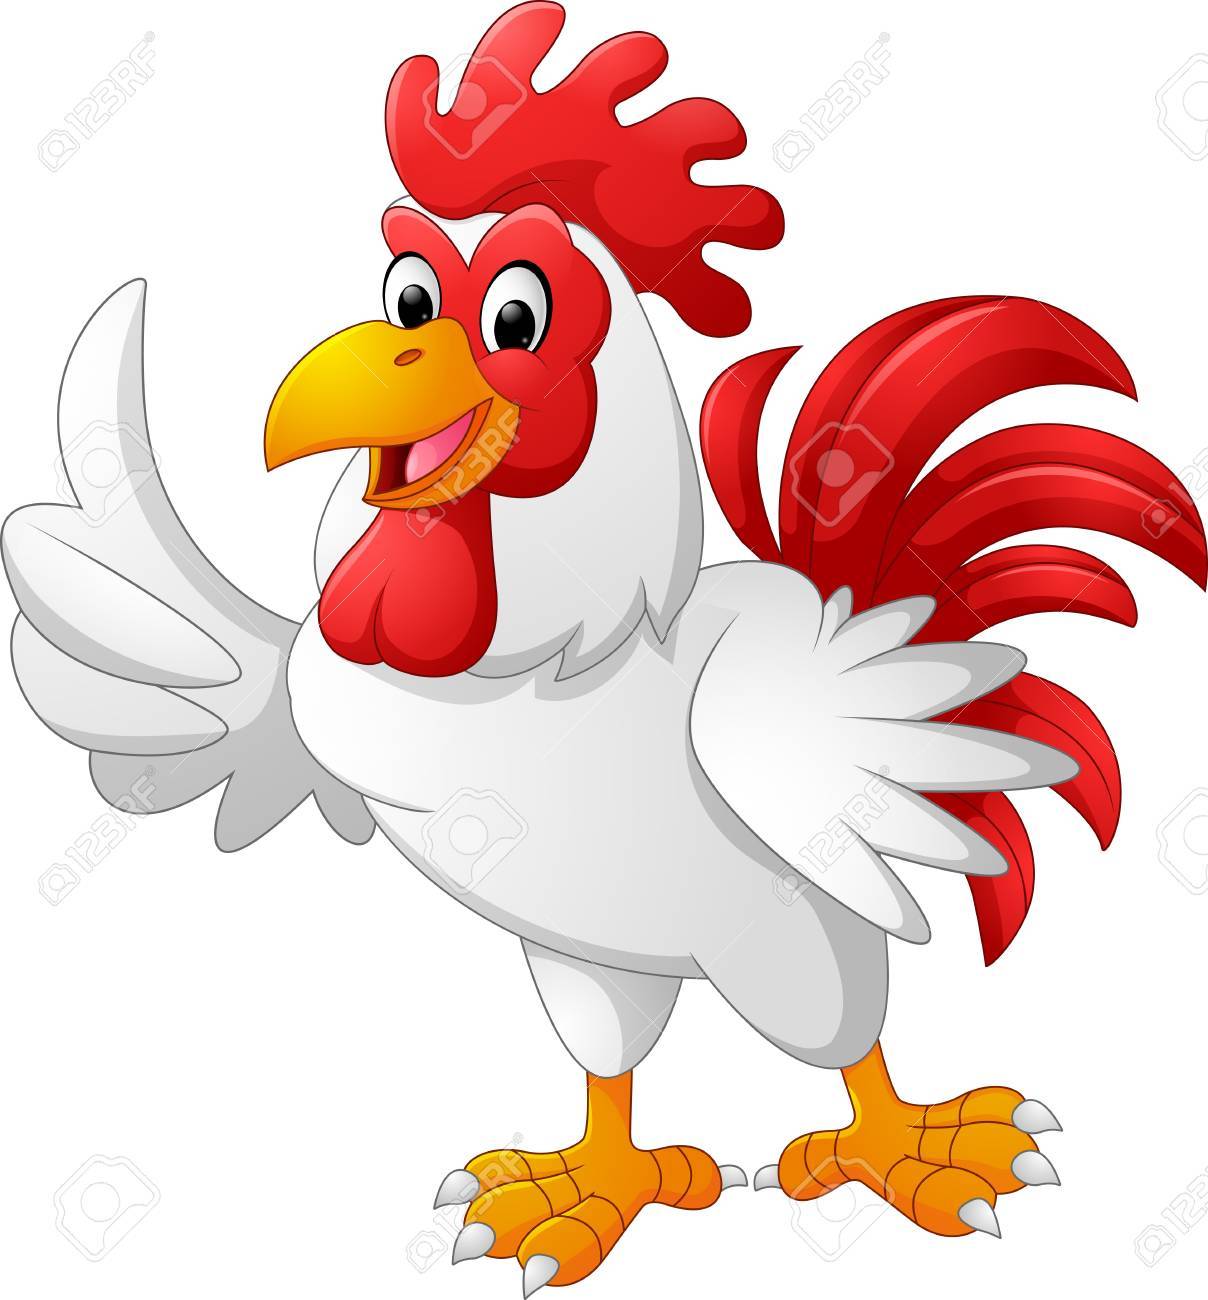 Cartoon rooster giving thumb up.